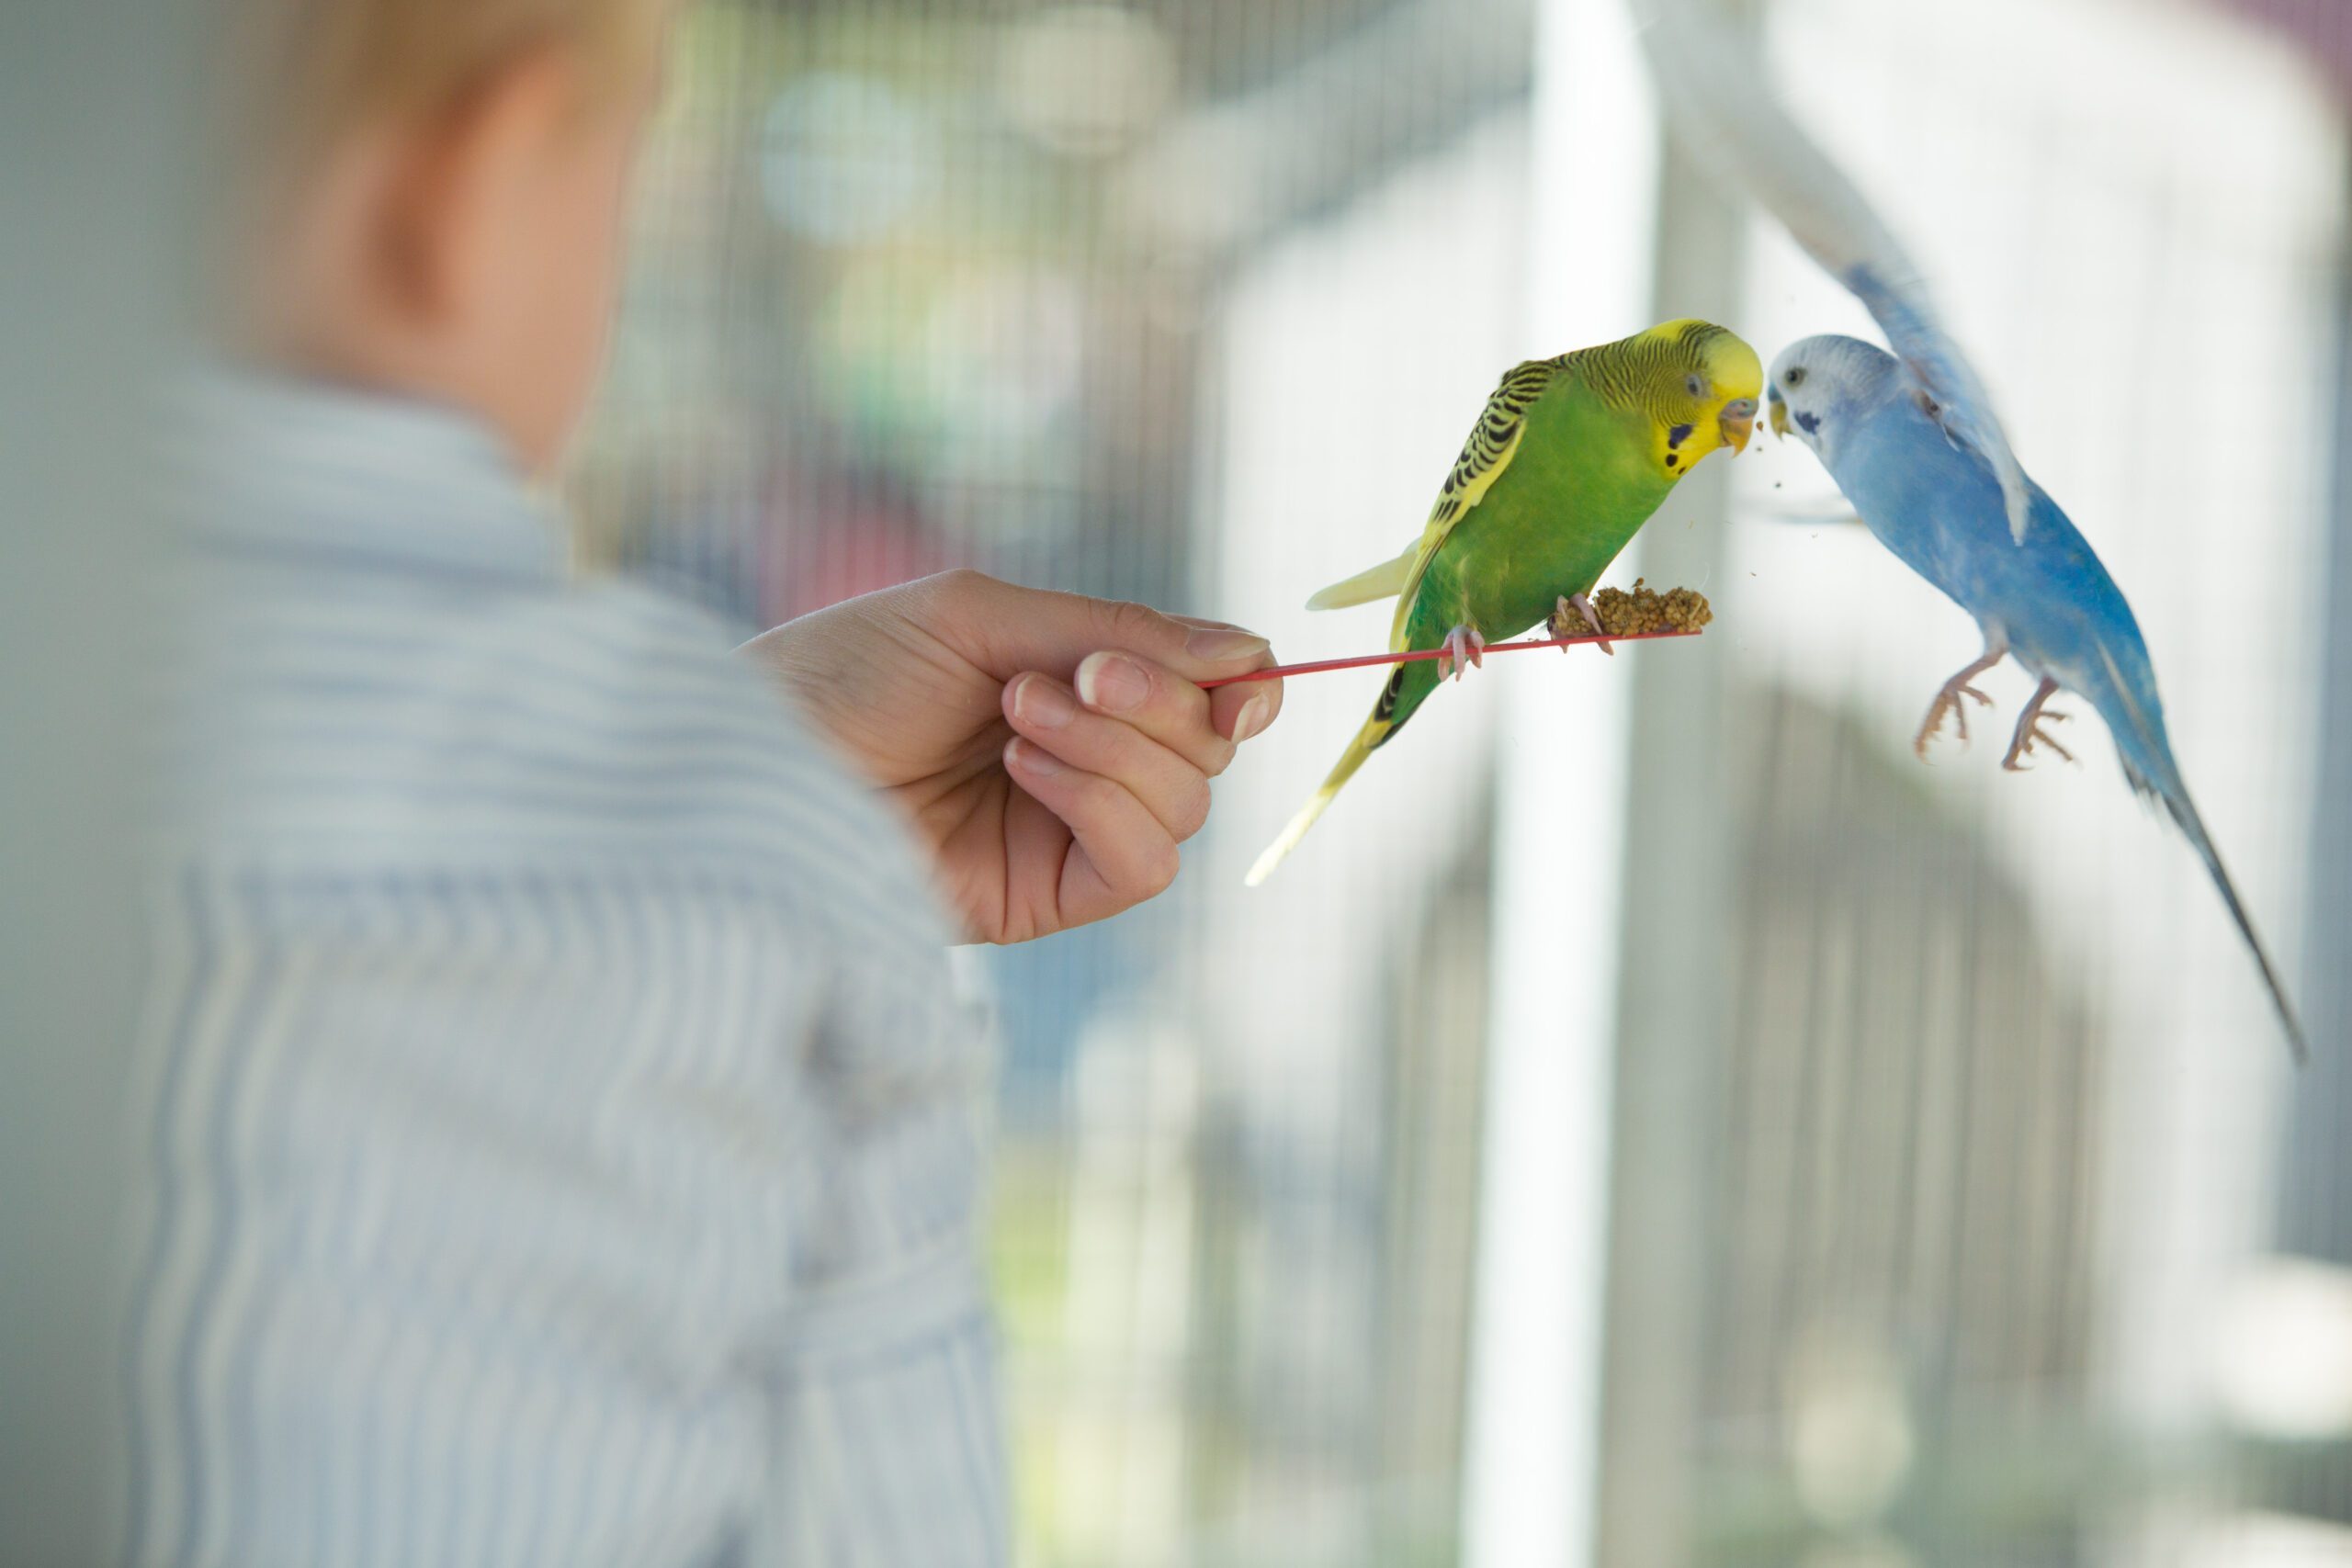 A person is holding a perch with two colorful parakeets, one green and one blue, in a bright environment.